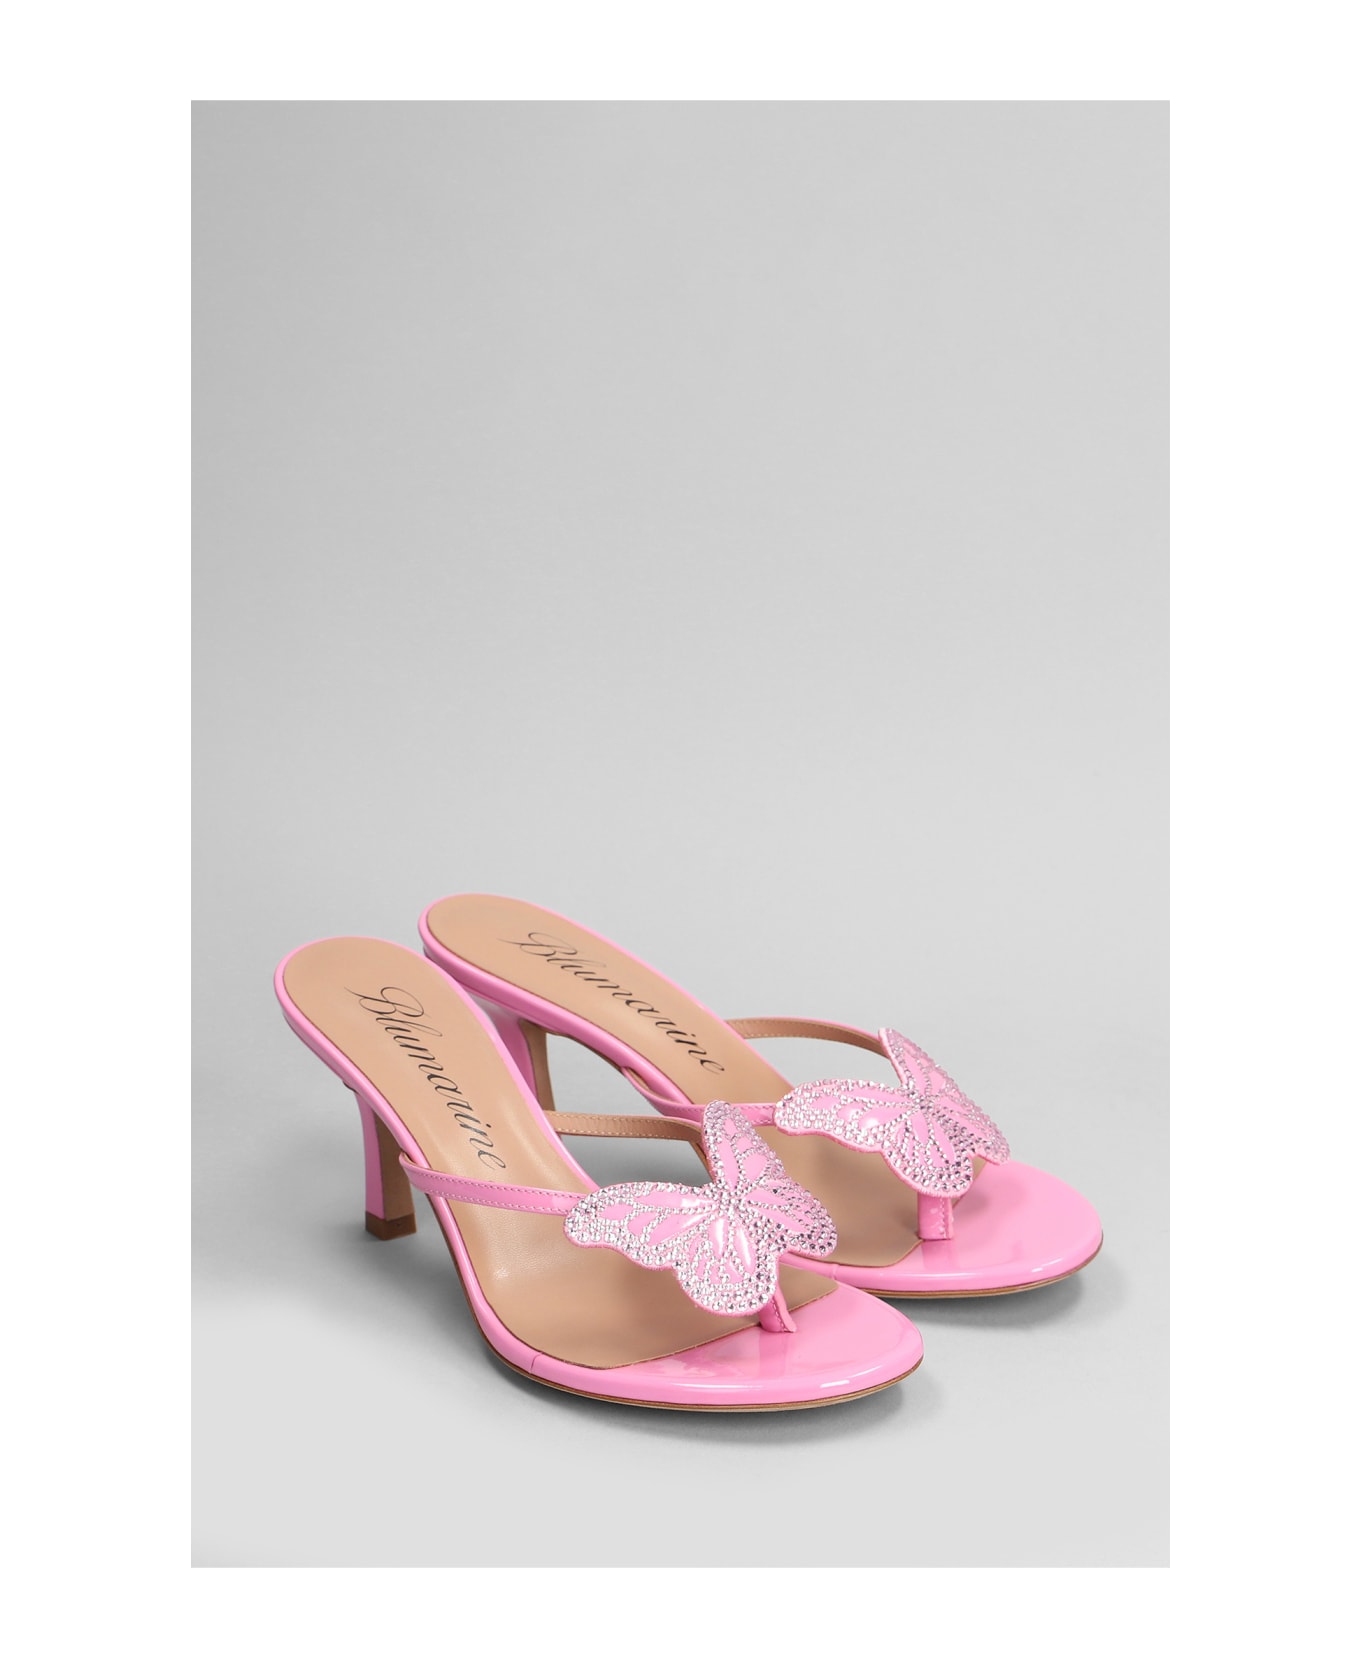 Blumarine Butterfly Slipper-mule In Rose-pink Patent Leather - rose-pink